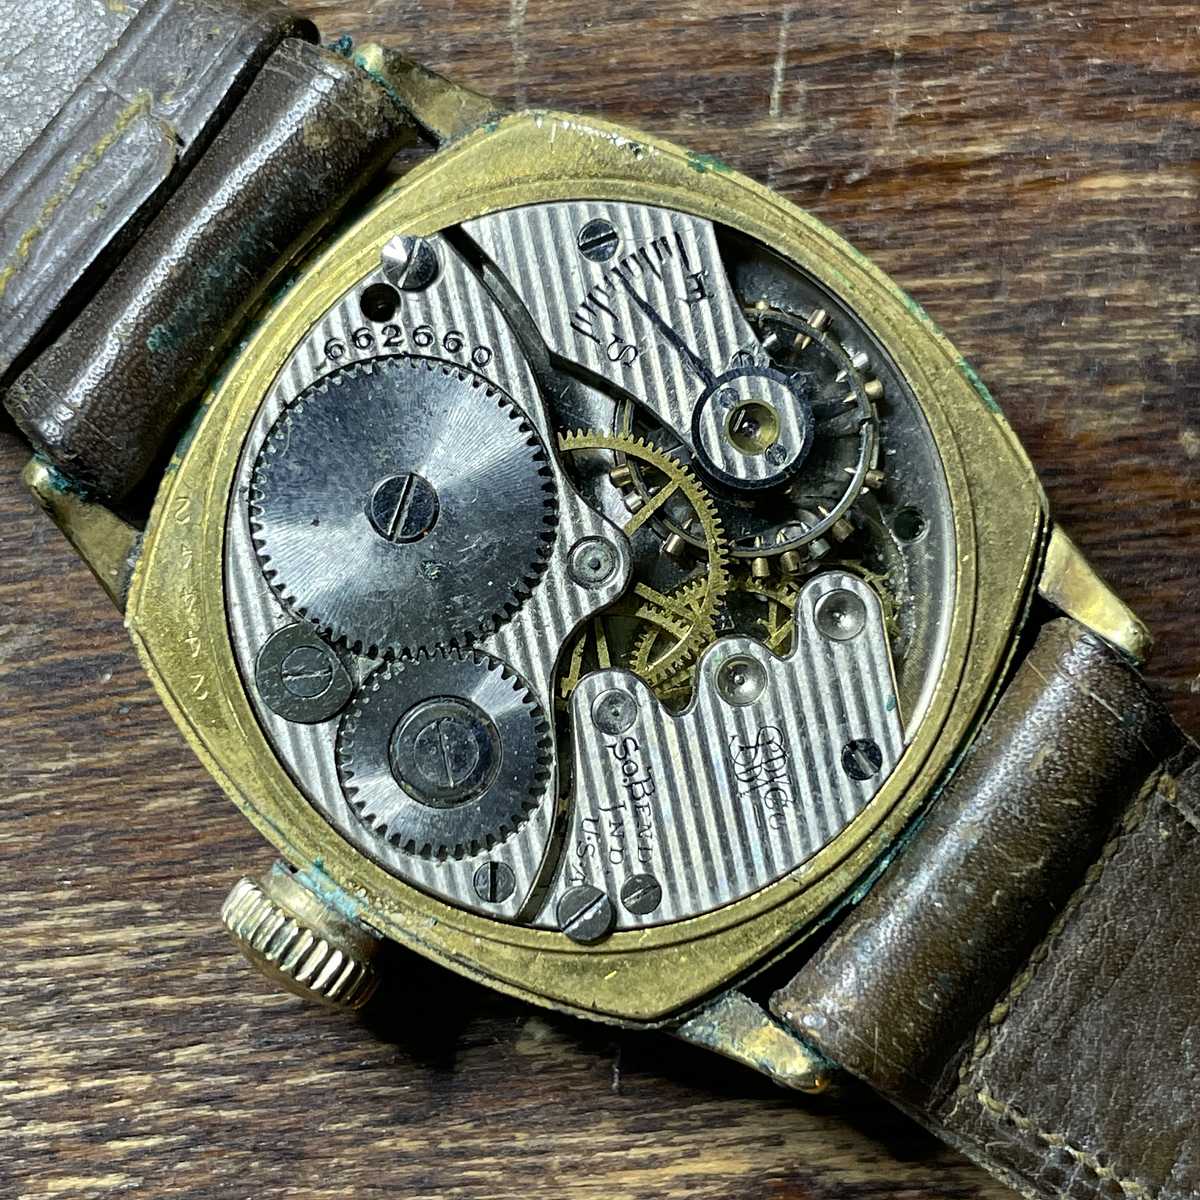 1911 South Bend Watch Grade 100 Good view of the serial number